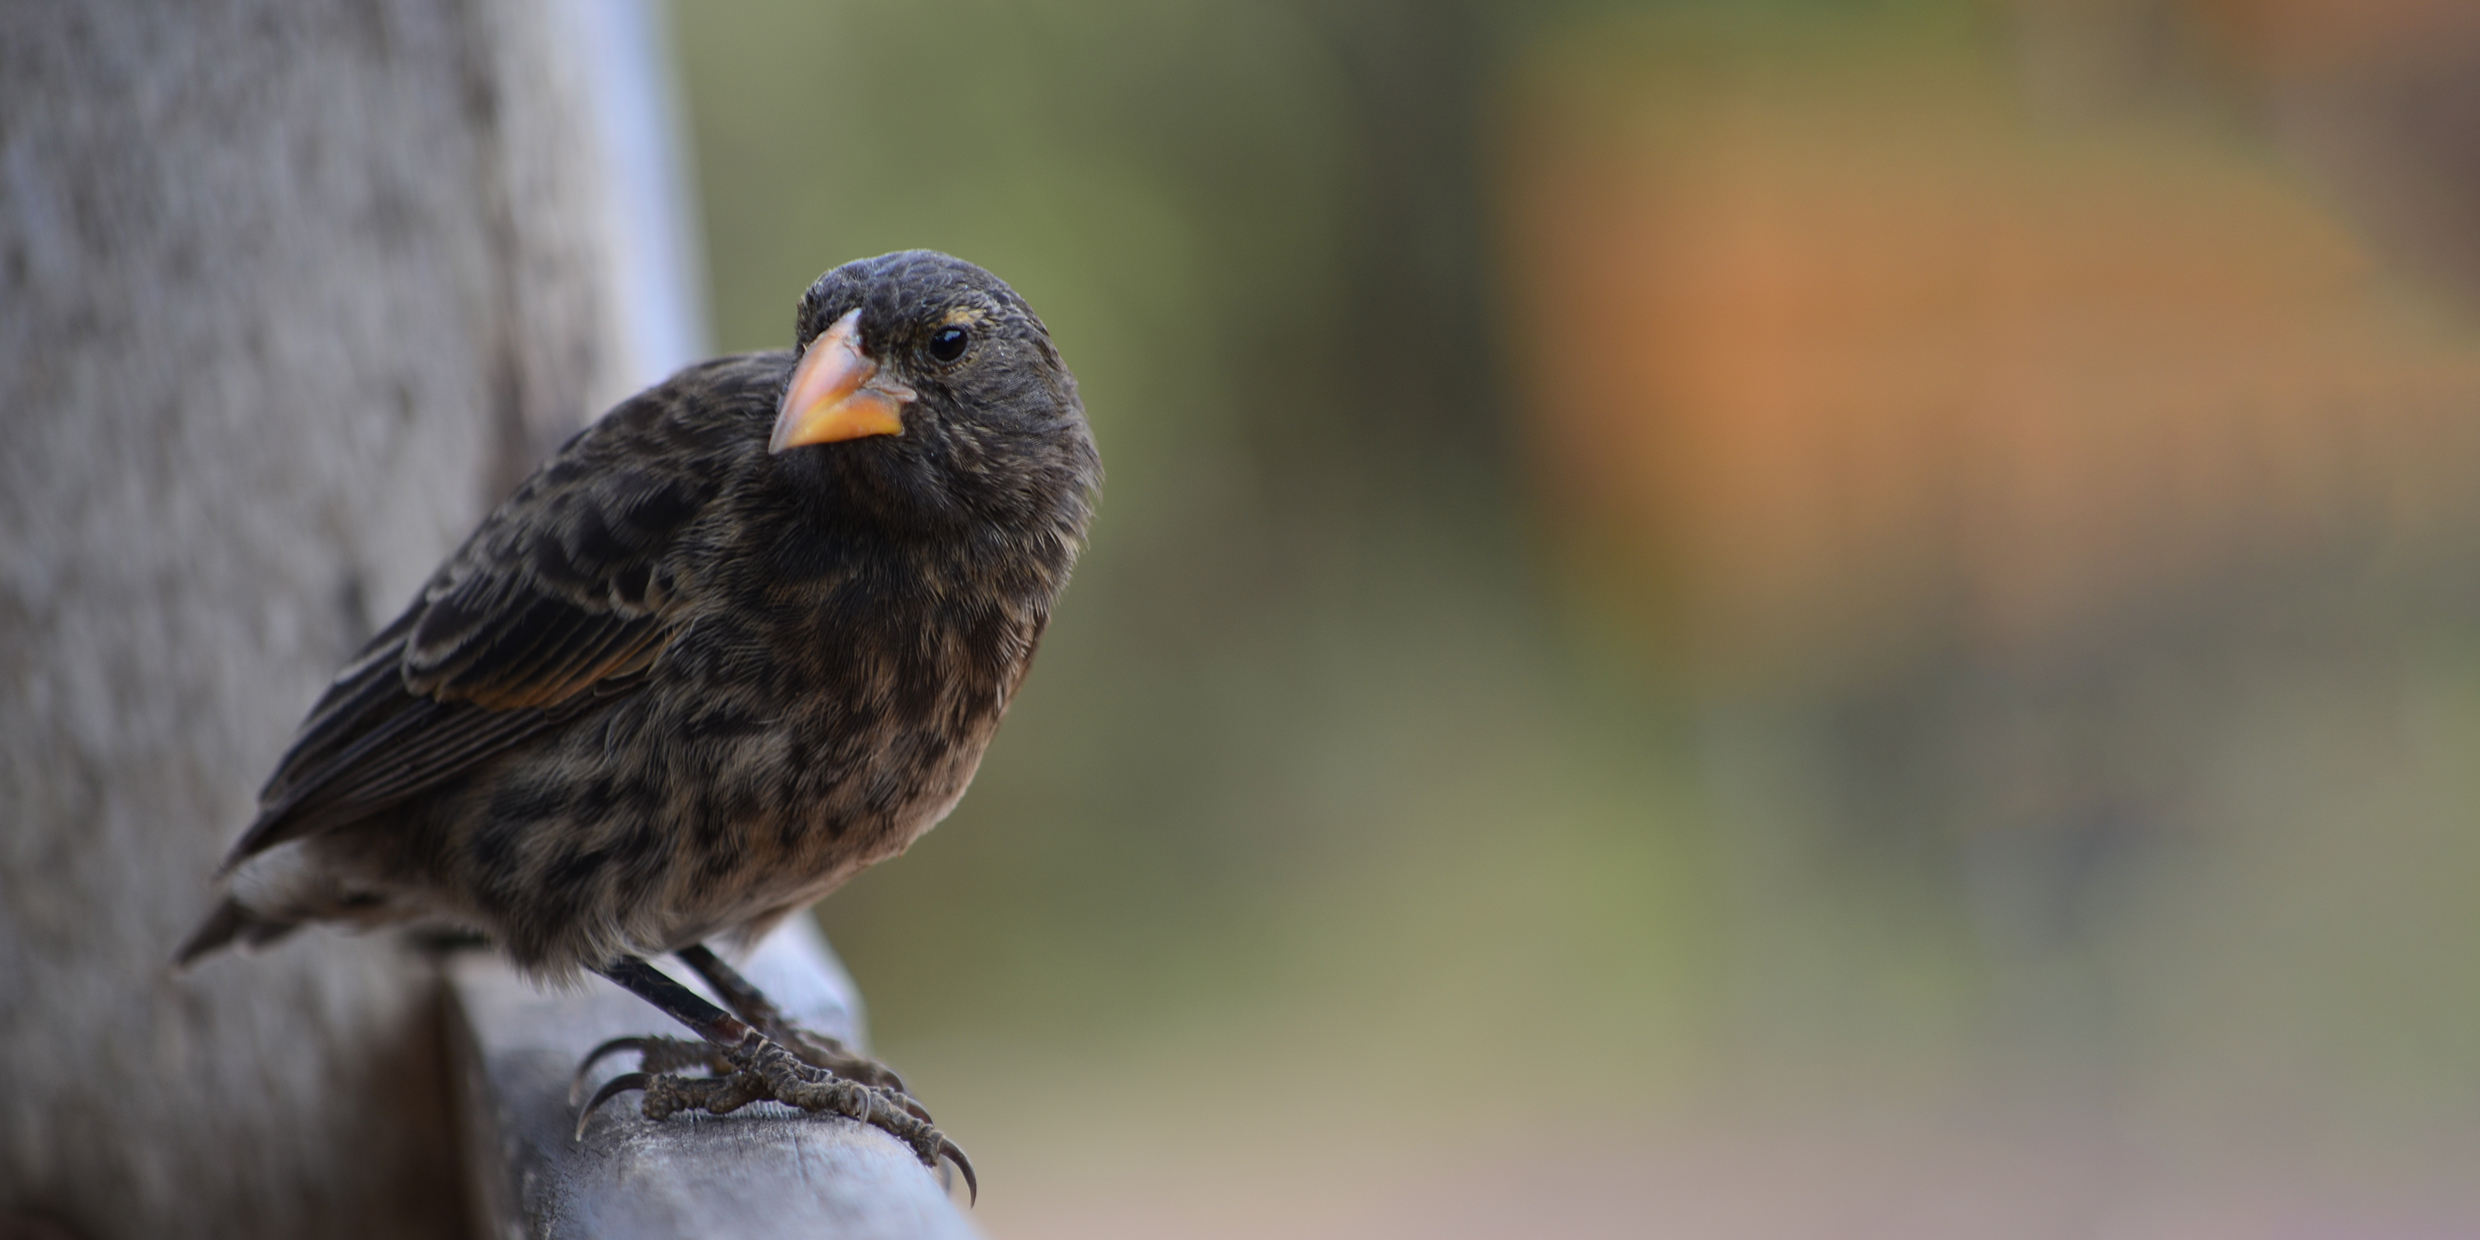 Image of a brown ground finch standing on a wooden rail